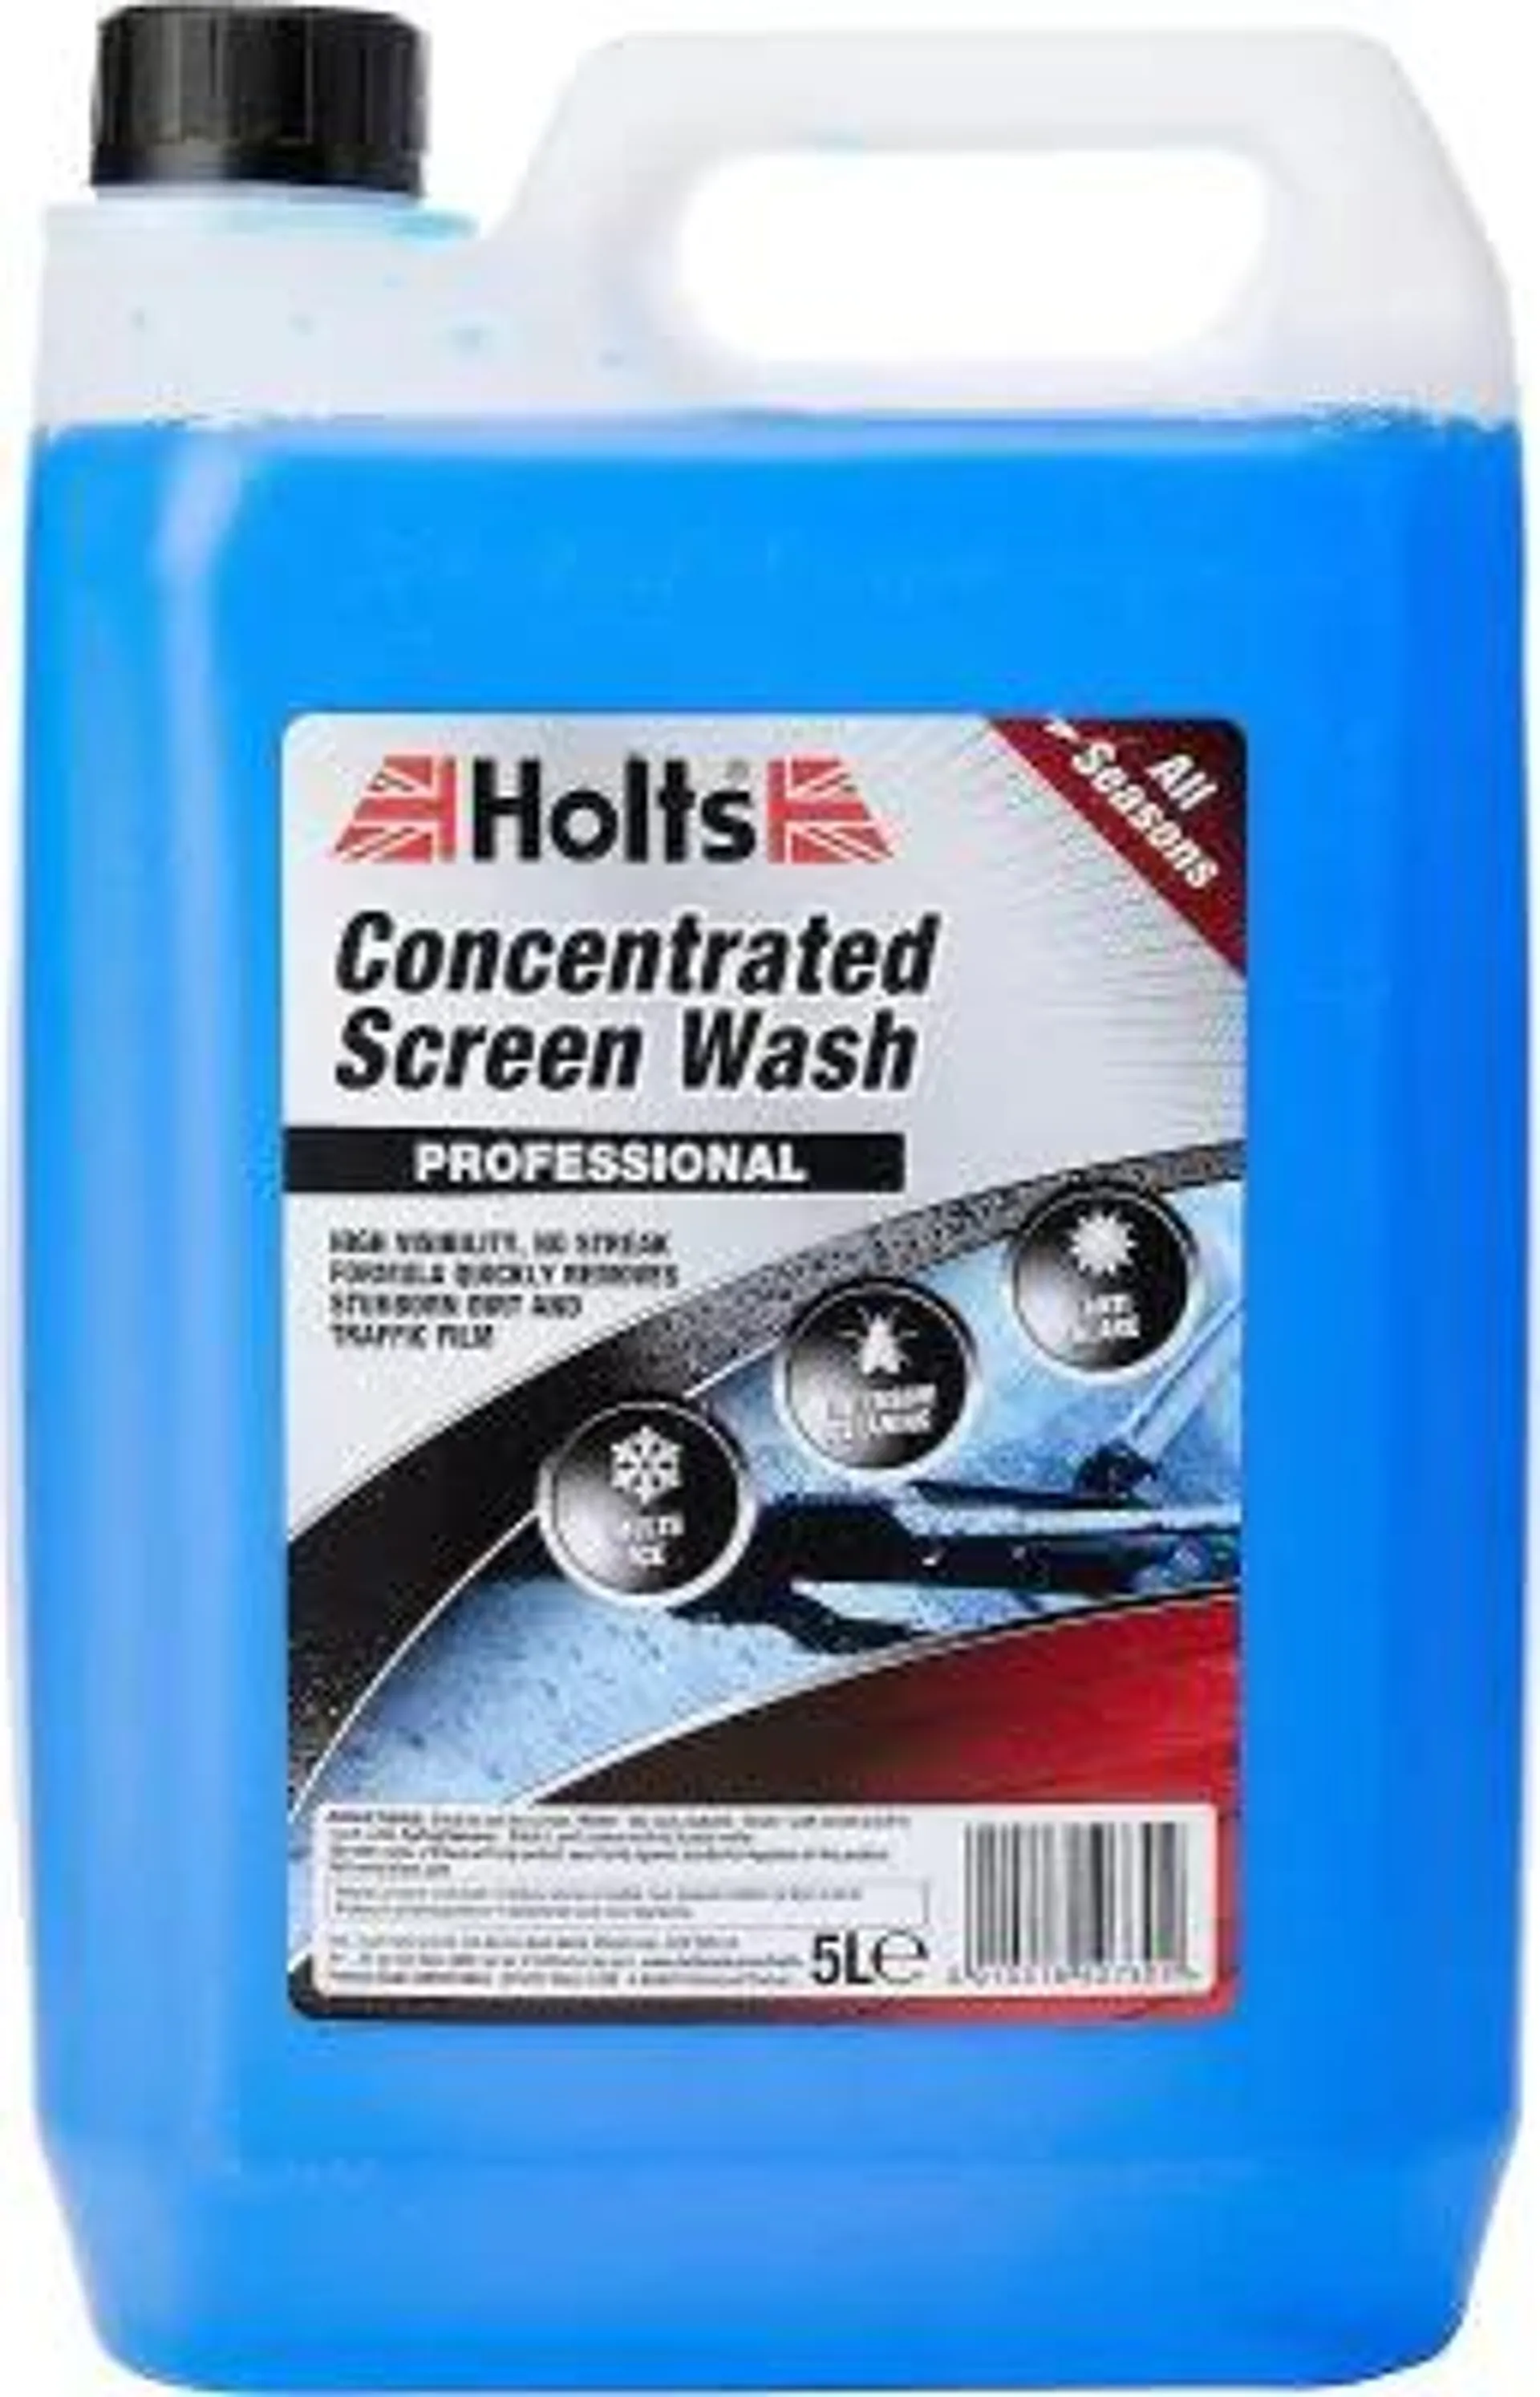 holts professional screenwash concentrate 5l